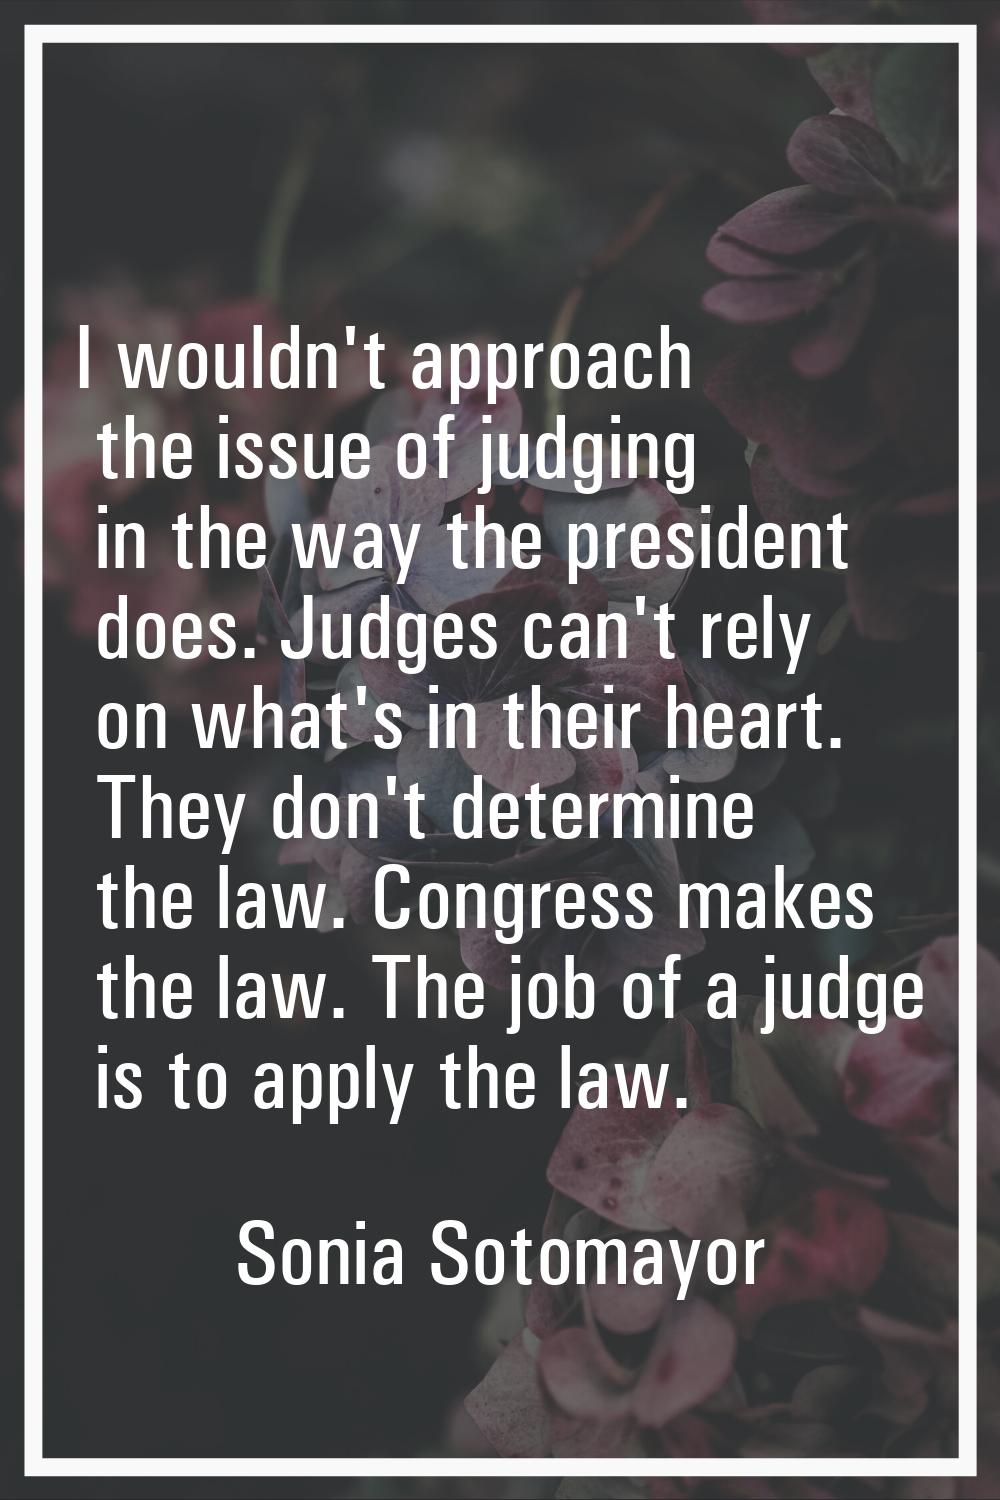 I wouldn't approach the issue of judging in the way the president does. Judges can't rely on what's